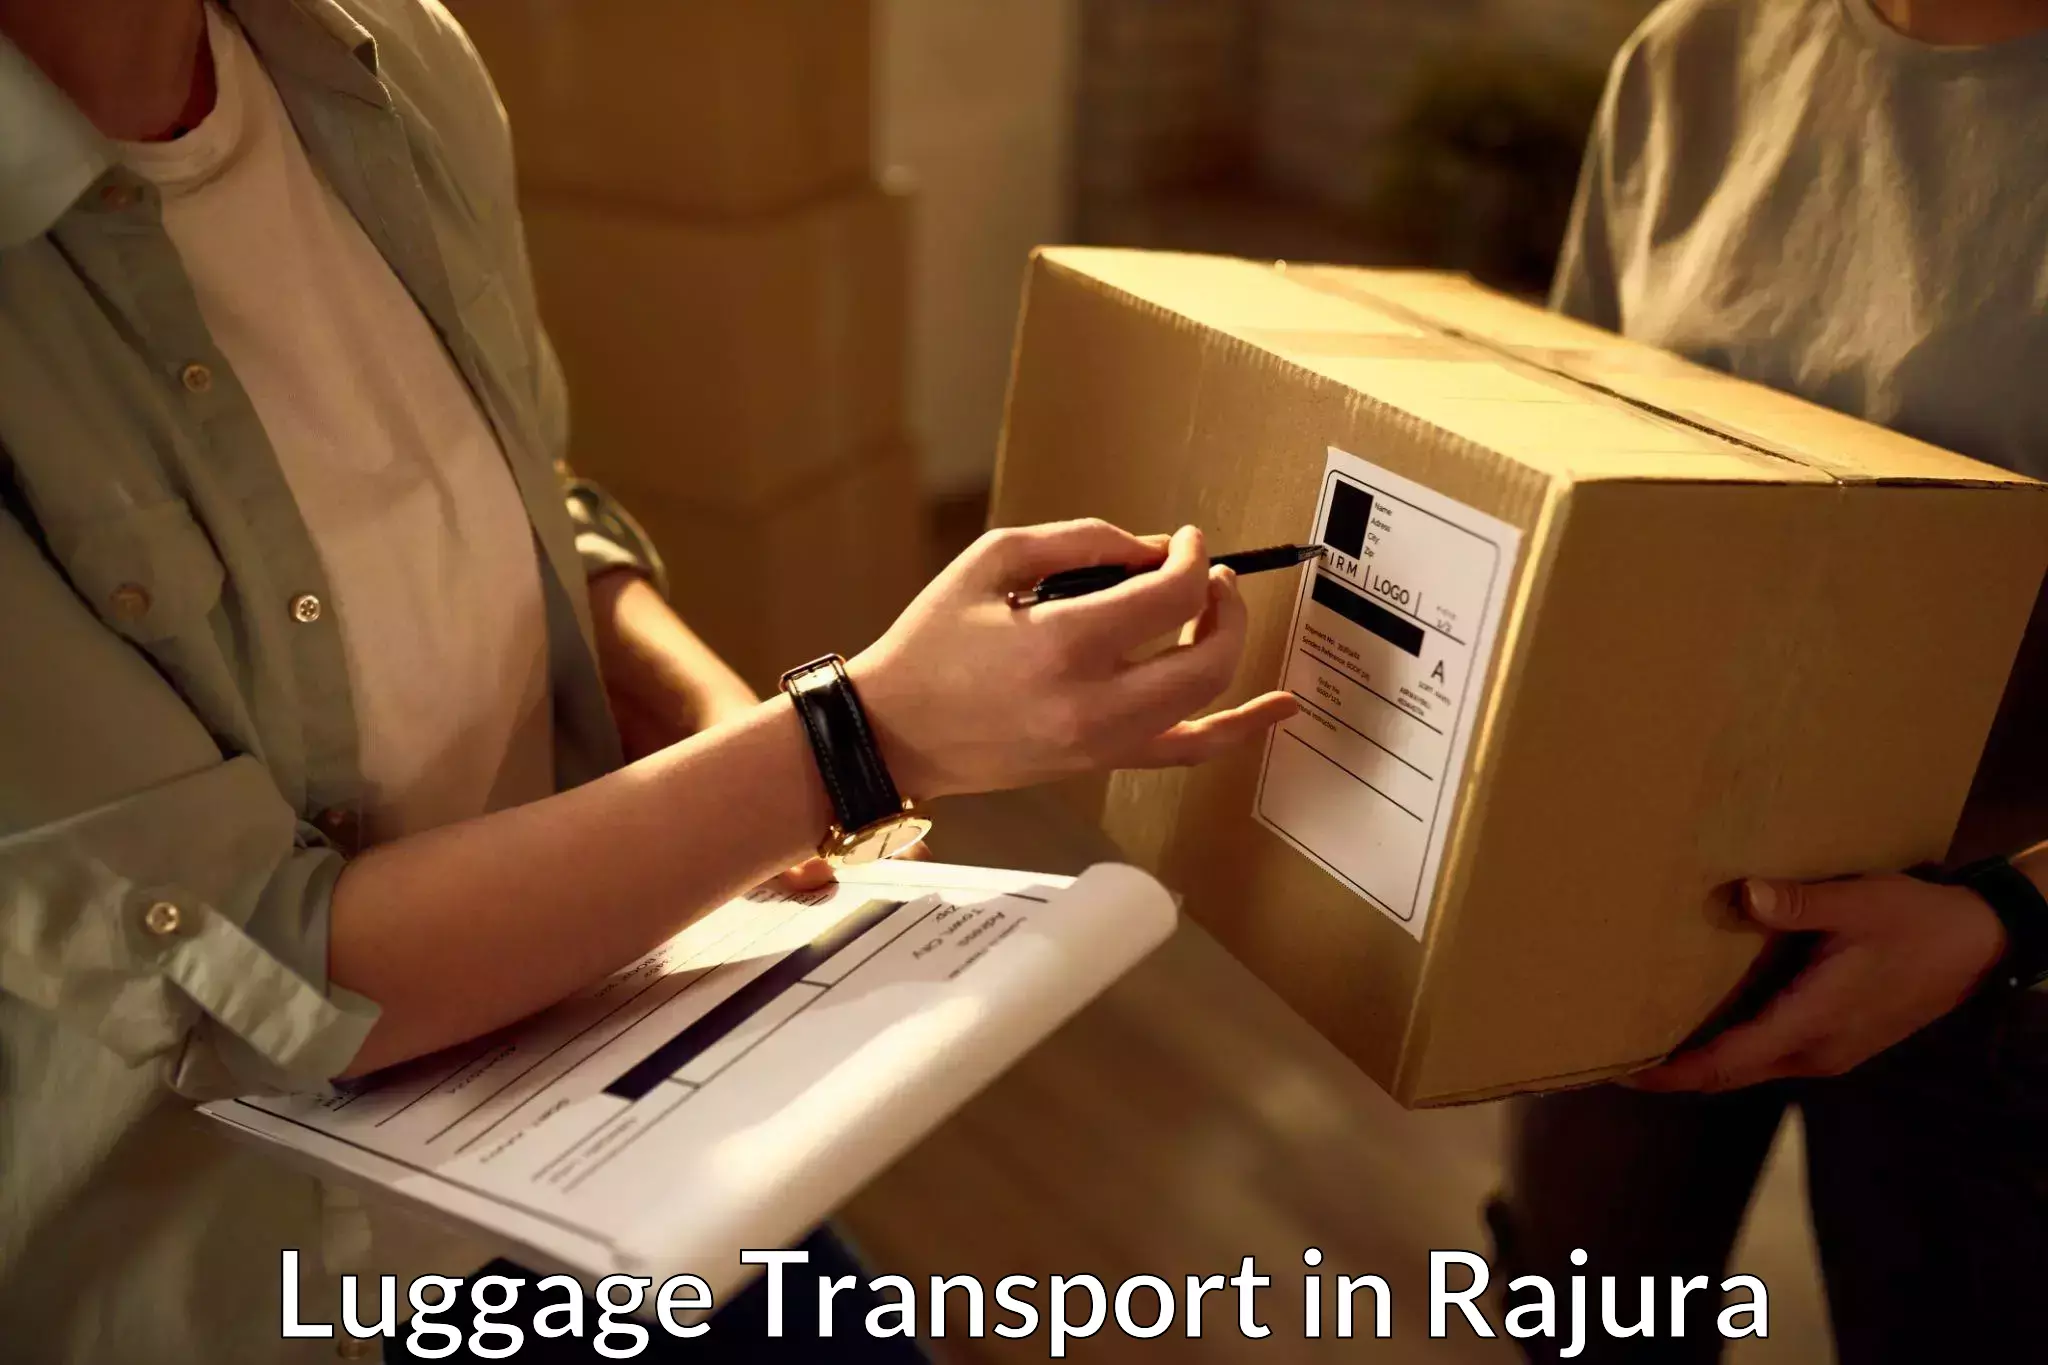 Baggage shipping experience in Rajura